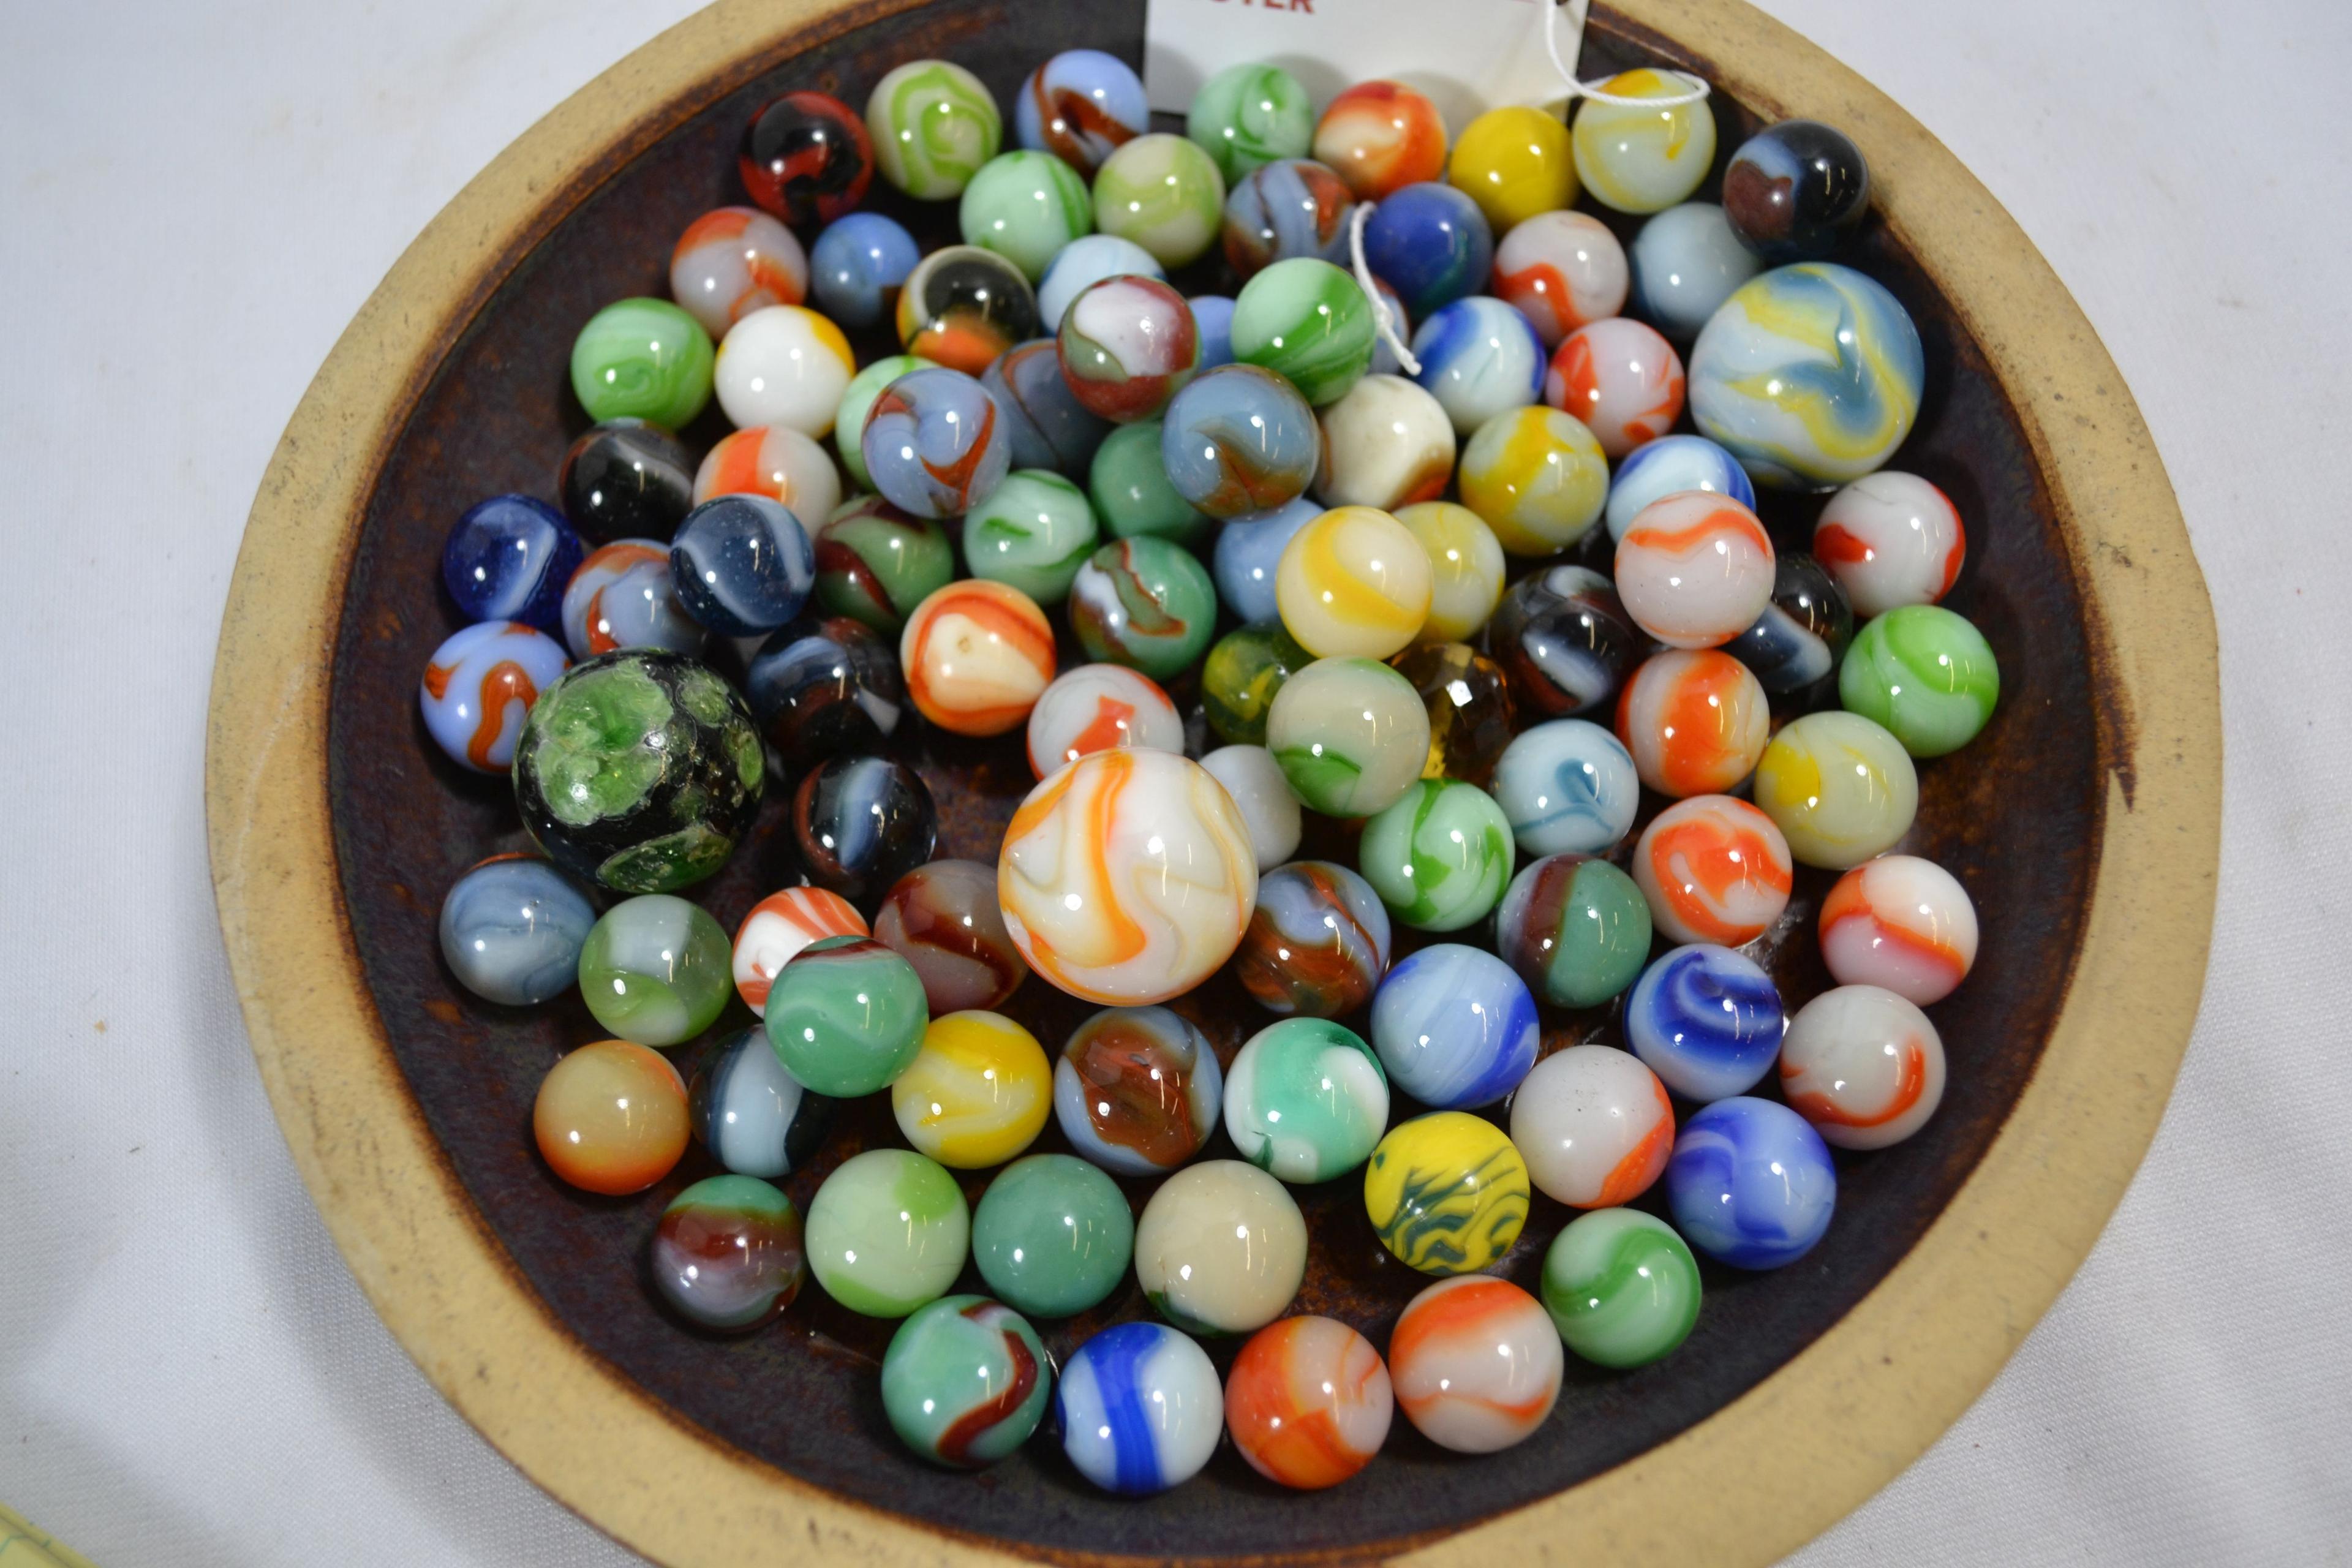 Vintage Marbles includes Slag, End of Day, and More